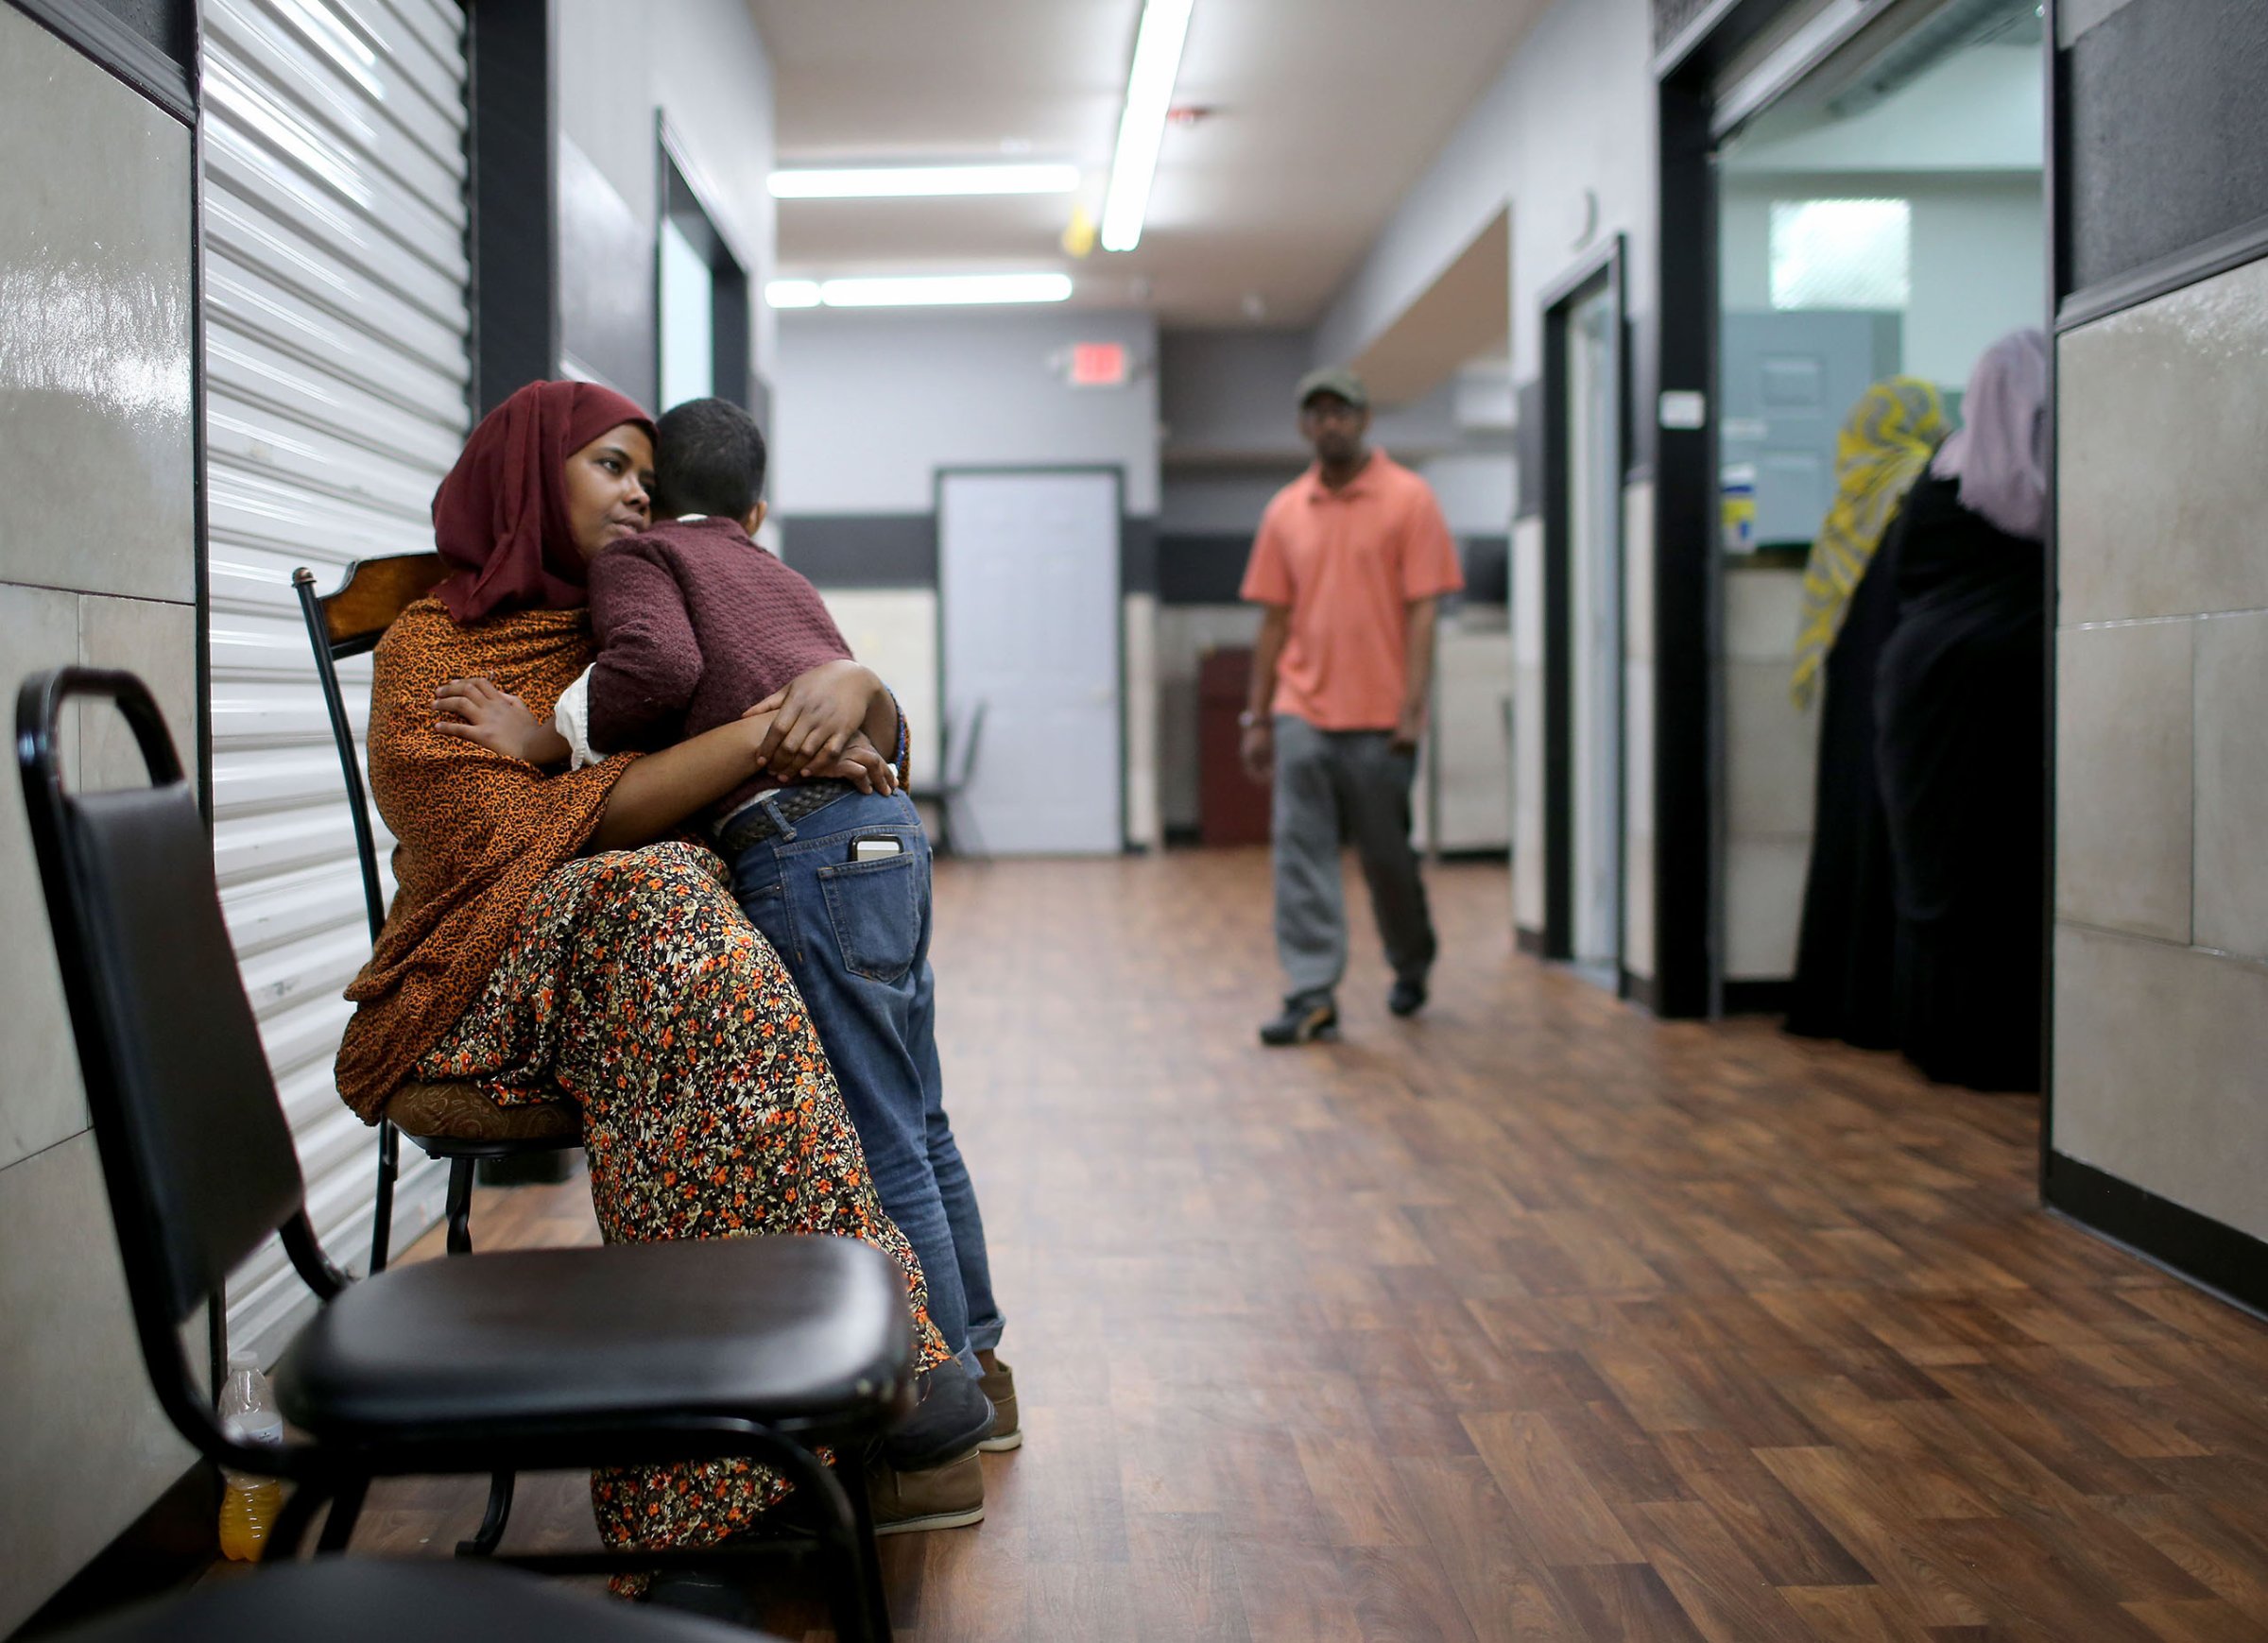 Ayan Farah, the mother of defendent Mohamed Farah, 22, hugs her youngest son outside the family's restaurant in the Karmel Mall in Minneapolis, Minn., June 3, 2016.